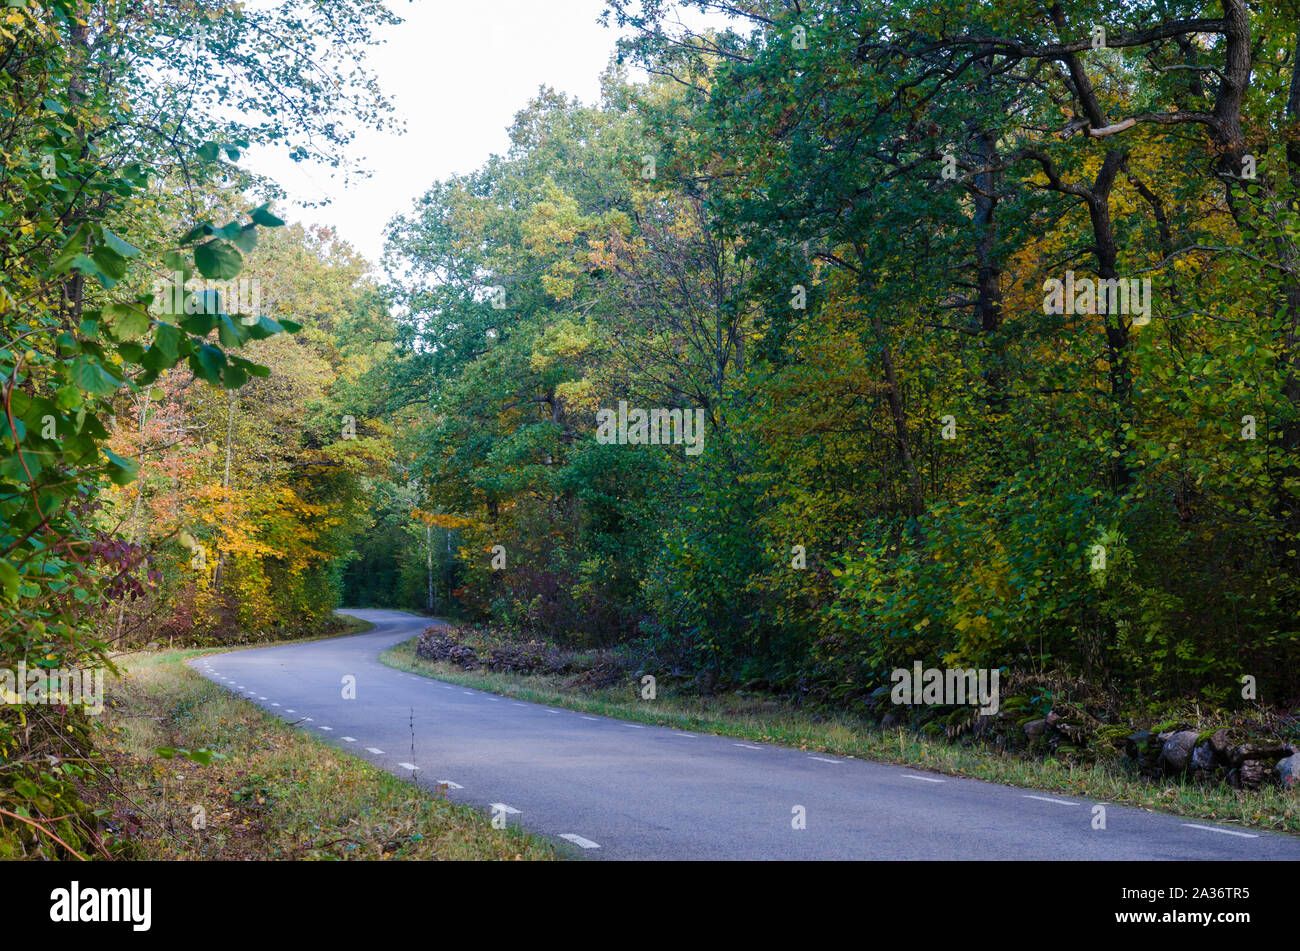 Curved country road through a forest in  fall season colors Stock Photo